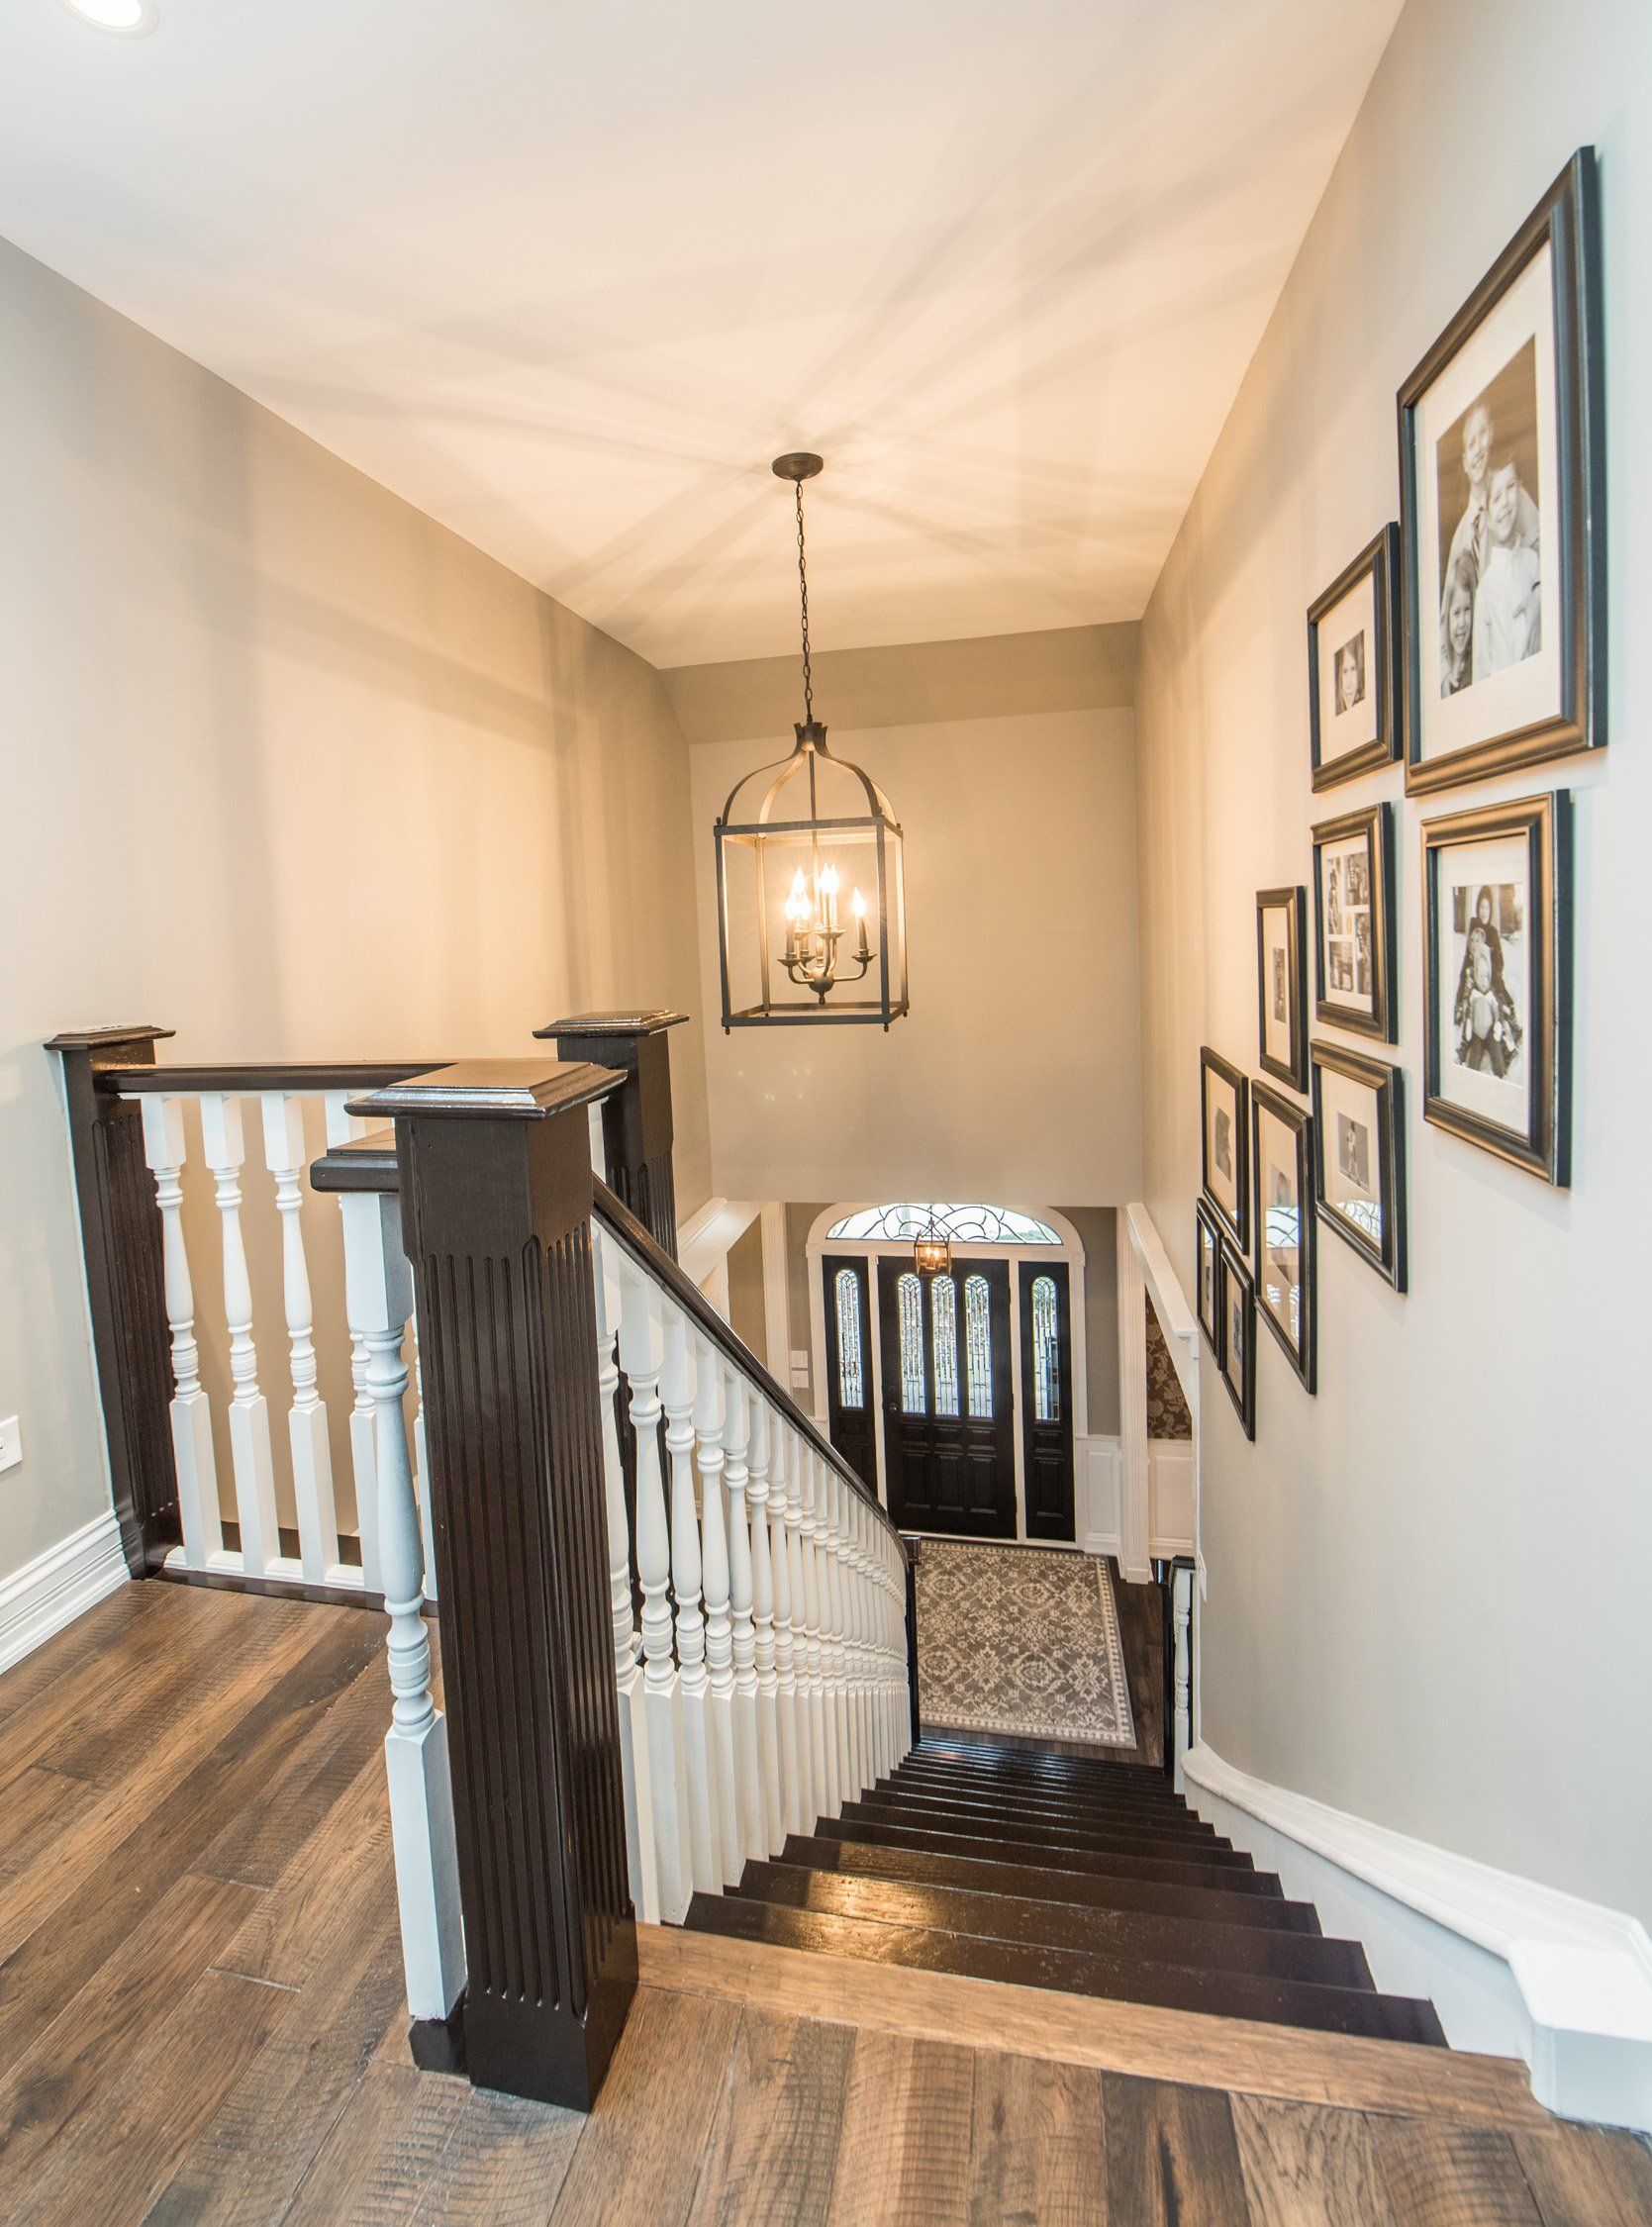 a staircase in a house with pictures on the wall and a lantern hanging from the ceiling .